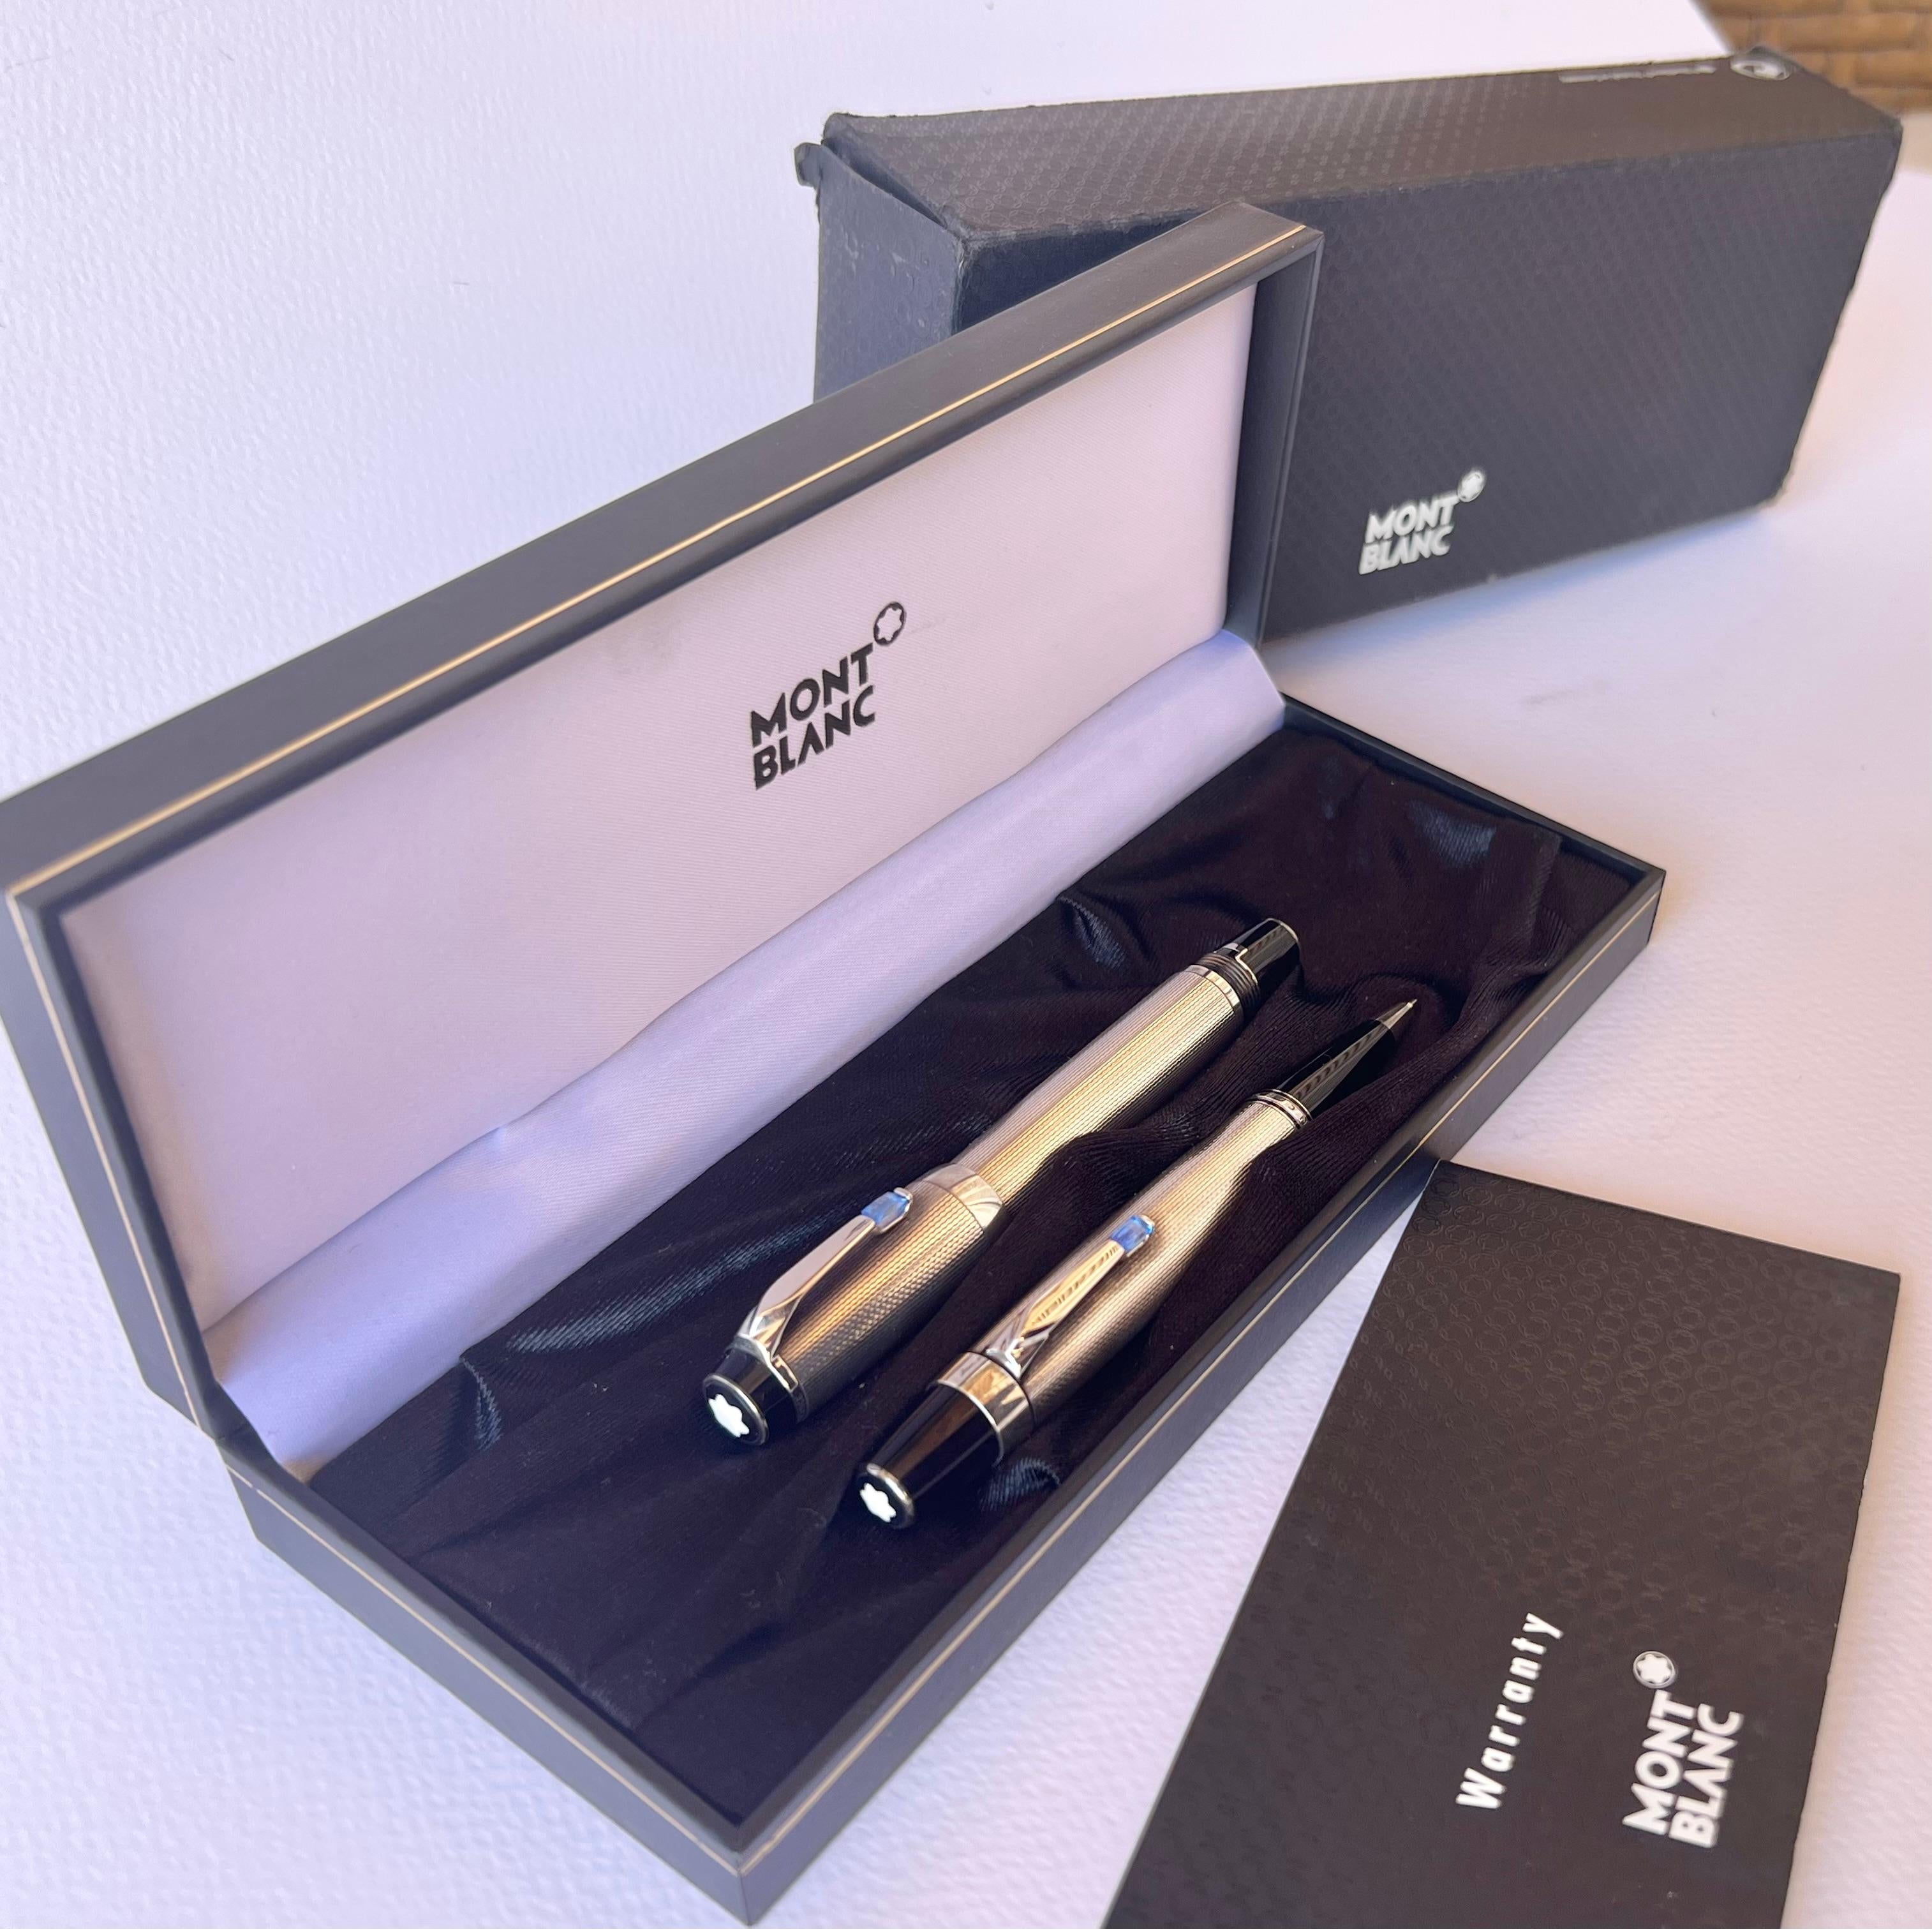  For your consideration Ultra Rare Group Of Two 2 Montblanc Boheme Sterling Silver Sapphire 18KNib Fountain Pen & Mechanical Pencil Set

Package Contain Two 2 Montblanc Boheme Sterling Silver Sapphire 18KNib Fountain Pen & Mechanical Pencil